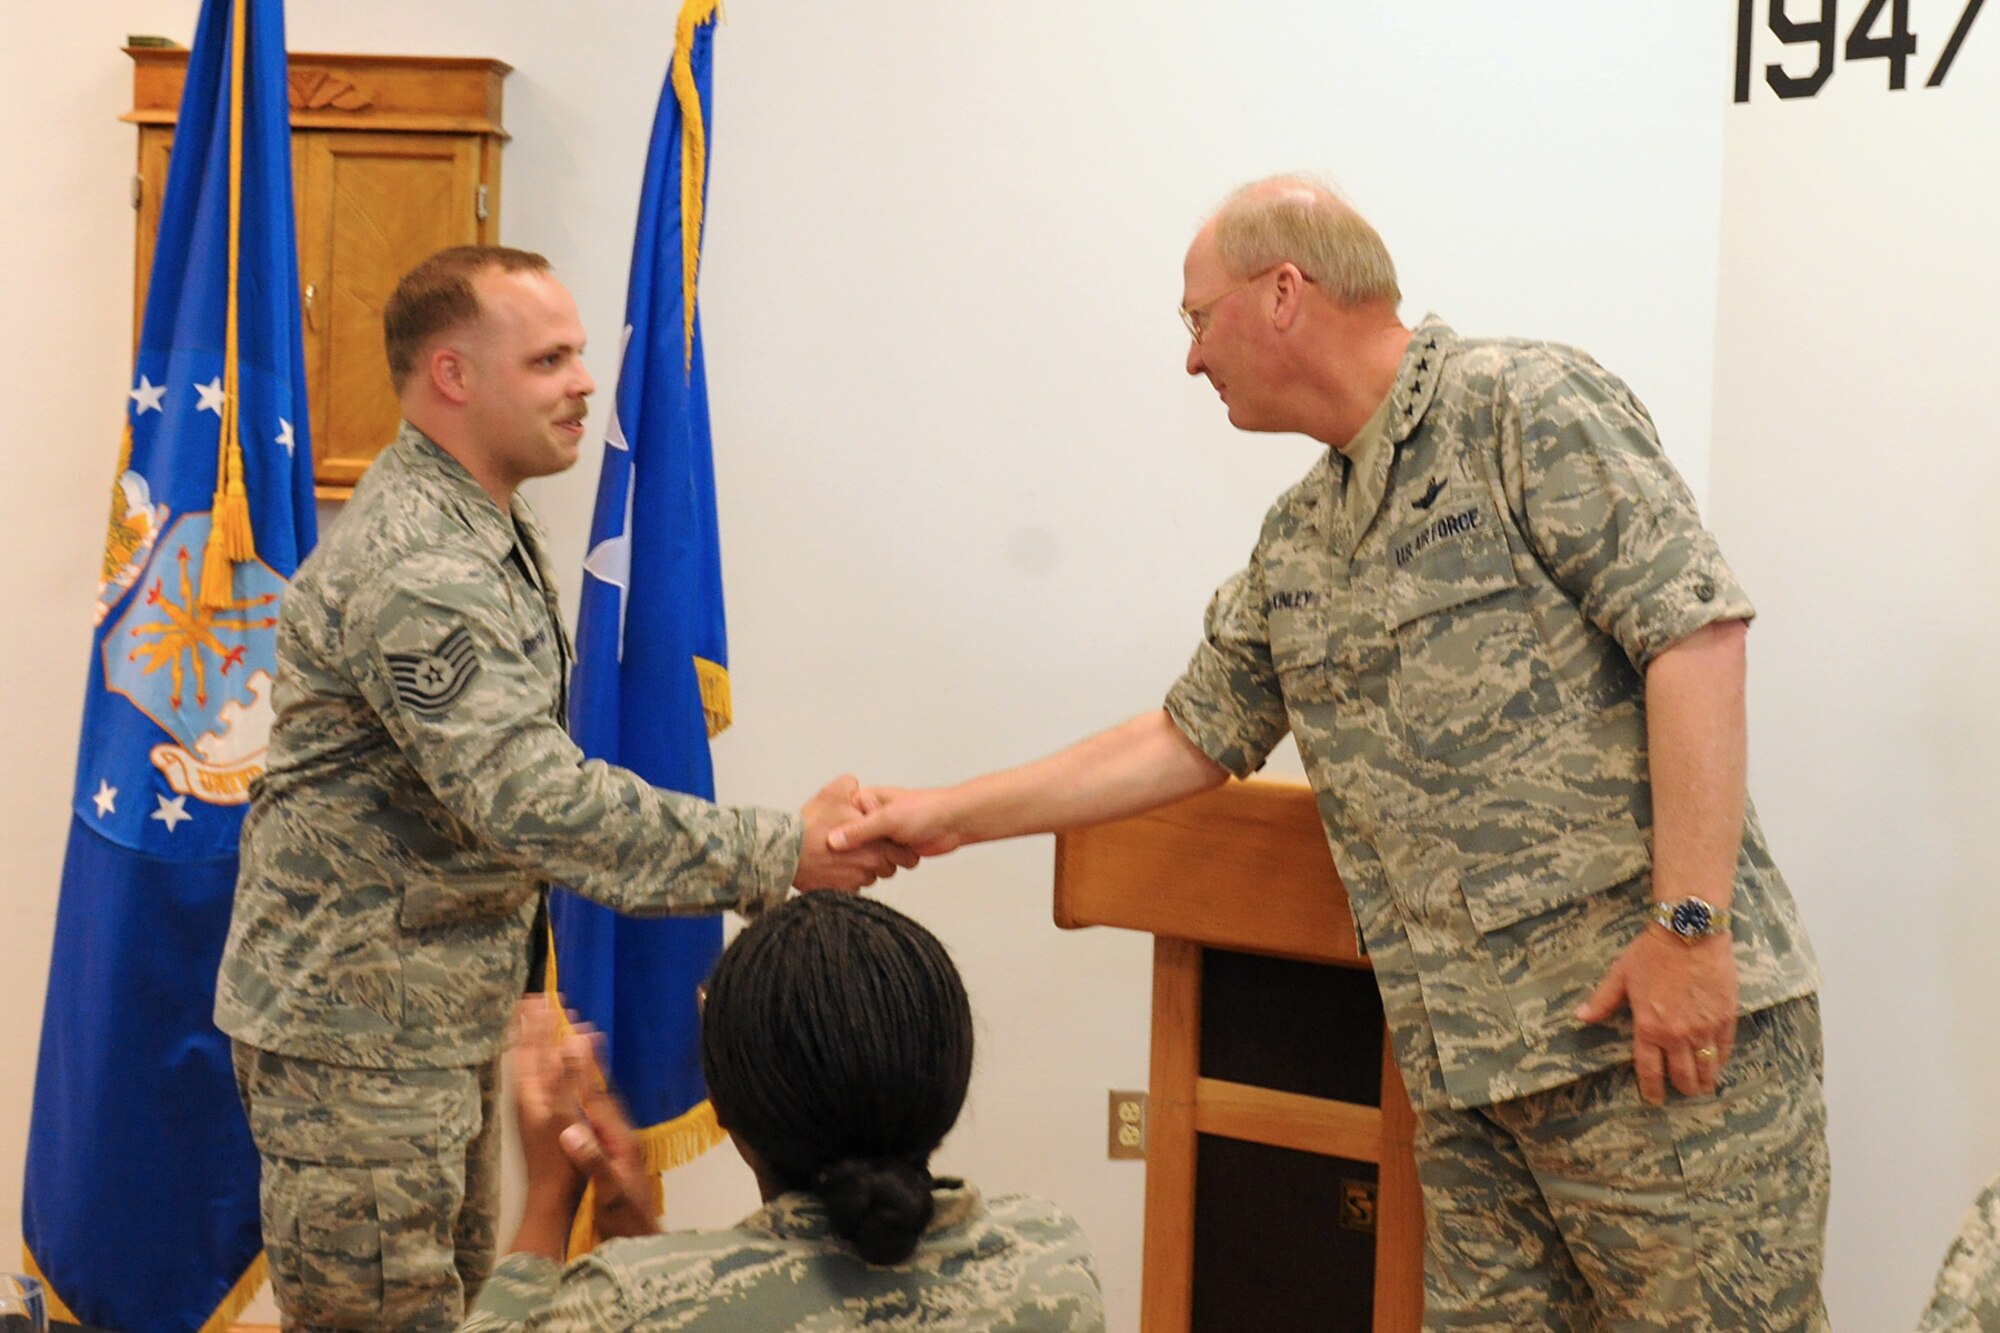 The National Guard Bureau Chief, Gen. Craig R. McKinley presents US Air Force Tech. Sgt. Michael Griepsma with a coin for outstanding work as a Ground Radio technician at Hancock Field in Syracuse NY on 5 May 2010. McKinley was meeting with members of the New York Air and Army guard at a luncheon to recognize the efforts of the men and women of these organizations. (US Air Force photo by Tech. Sgt. Jeremy M. Call/Released)